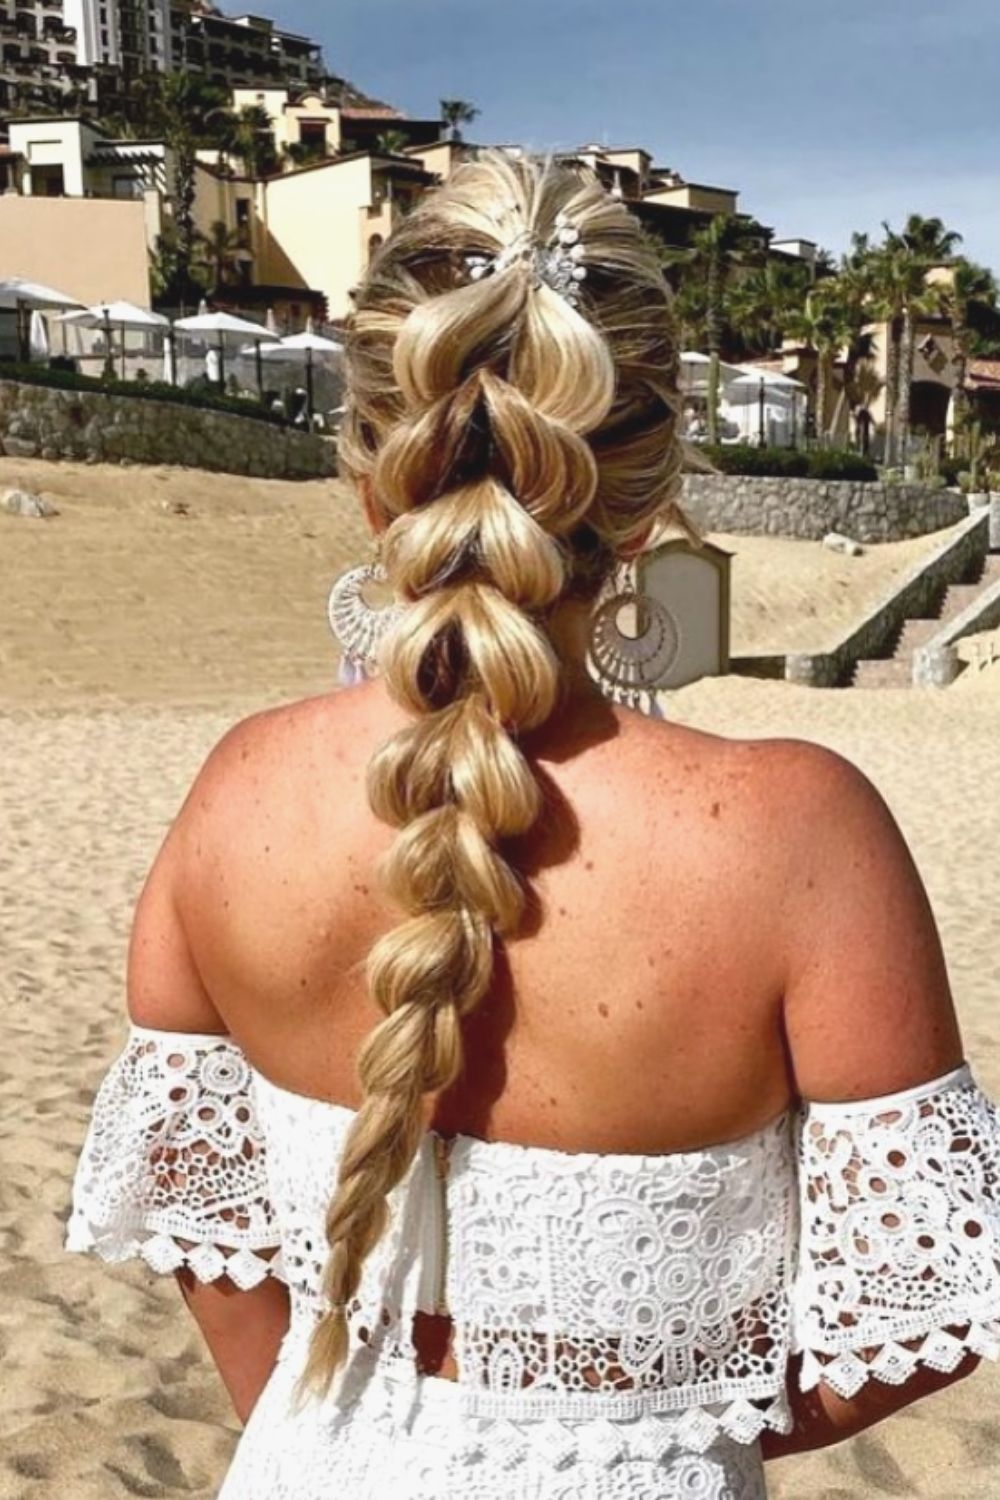 Beautiful Beach Hairstyle For A Meaningful Vacation 2021!